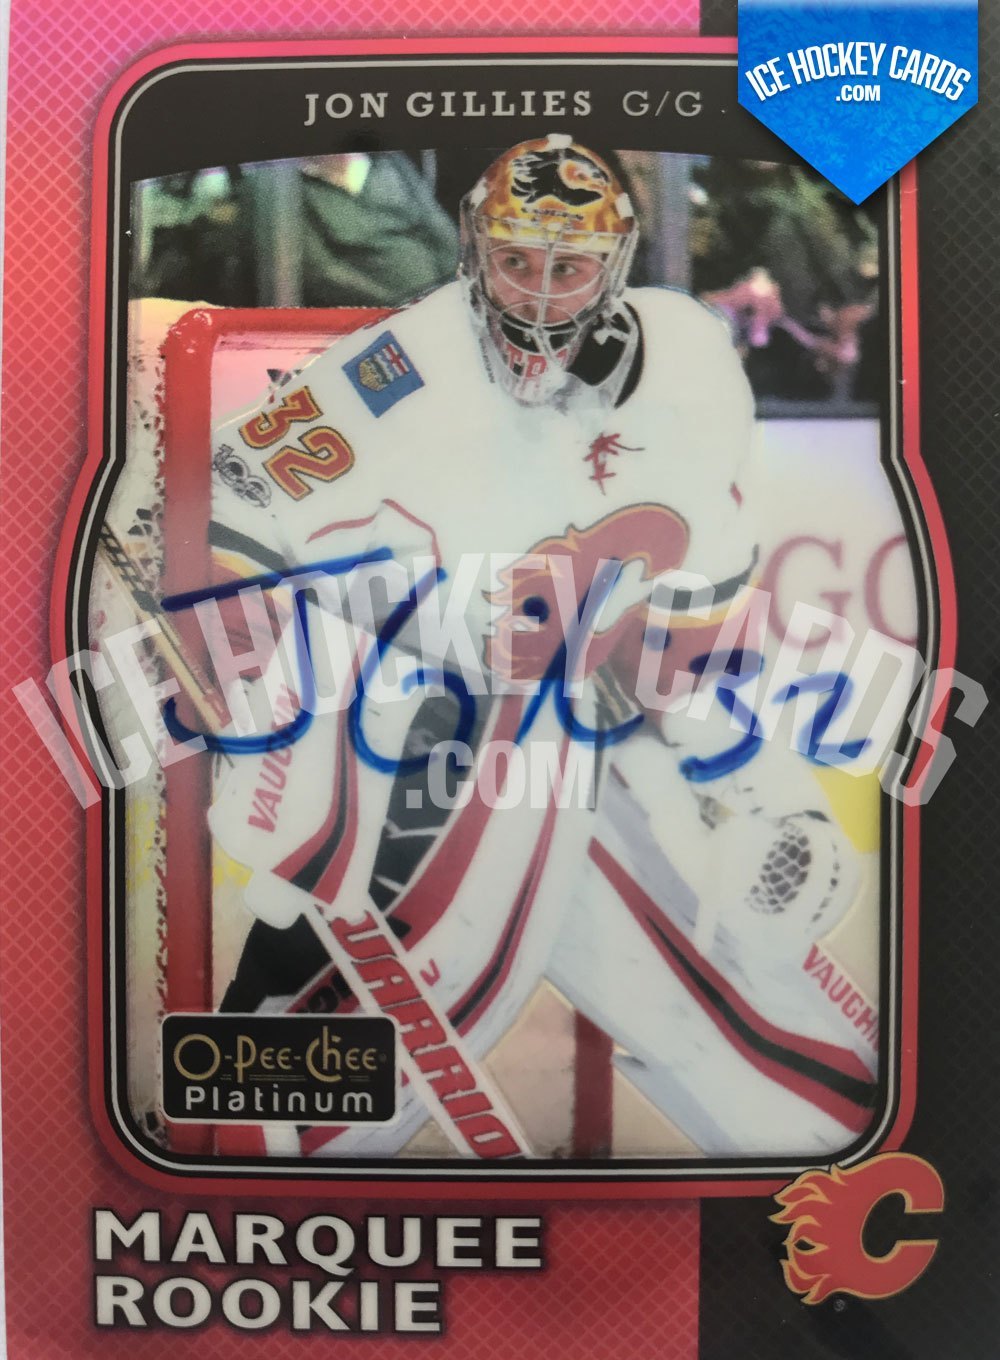 Upper Deck - O-Pee-Chee Platinum 17-18 (Update 18-19) - Jon Gillies Autographed Marquee Rookie Red Rainbow